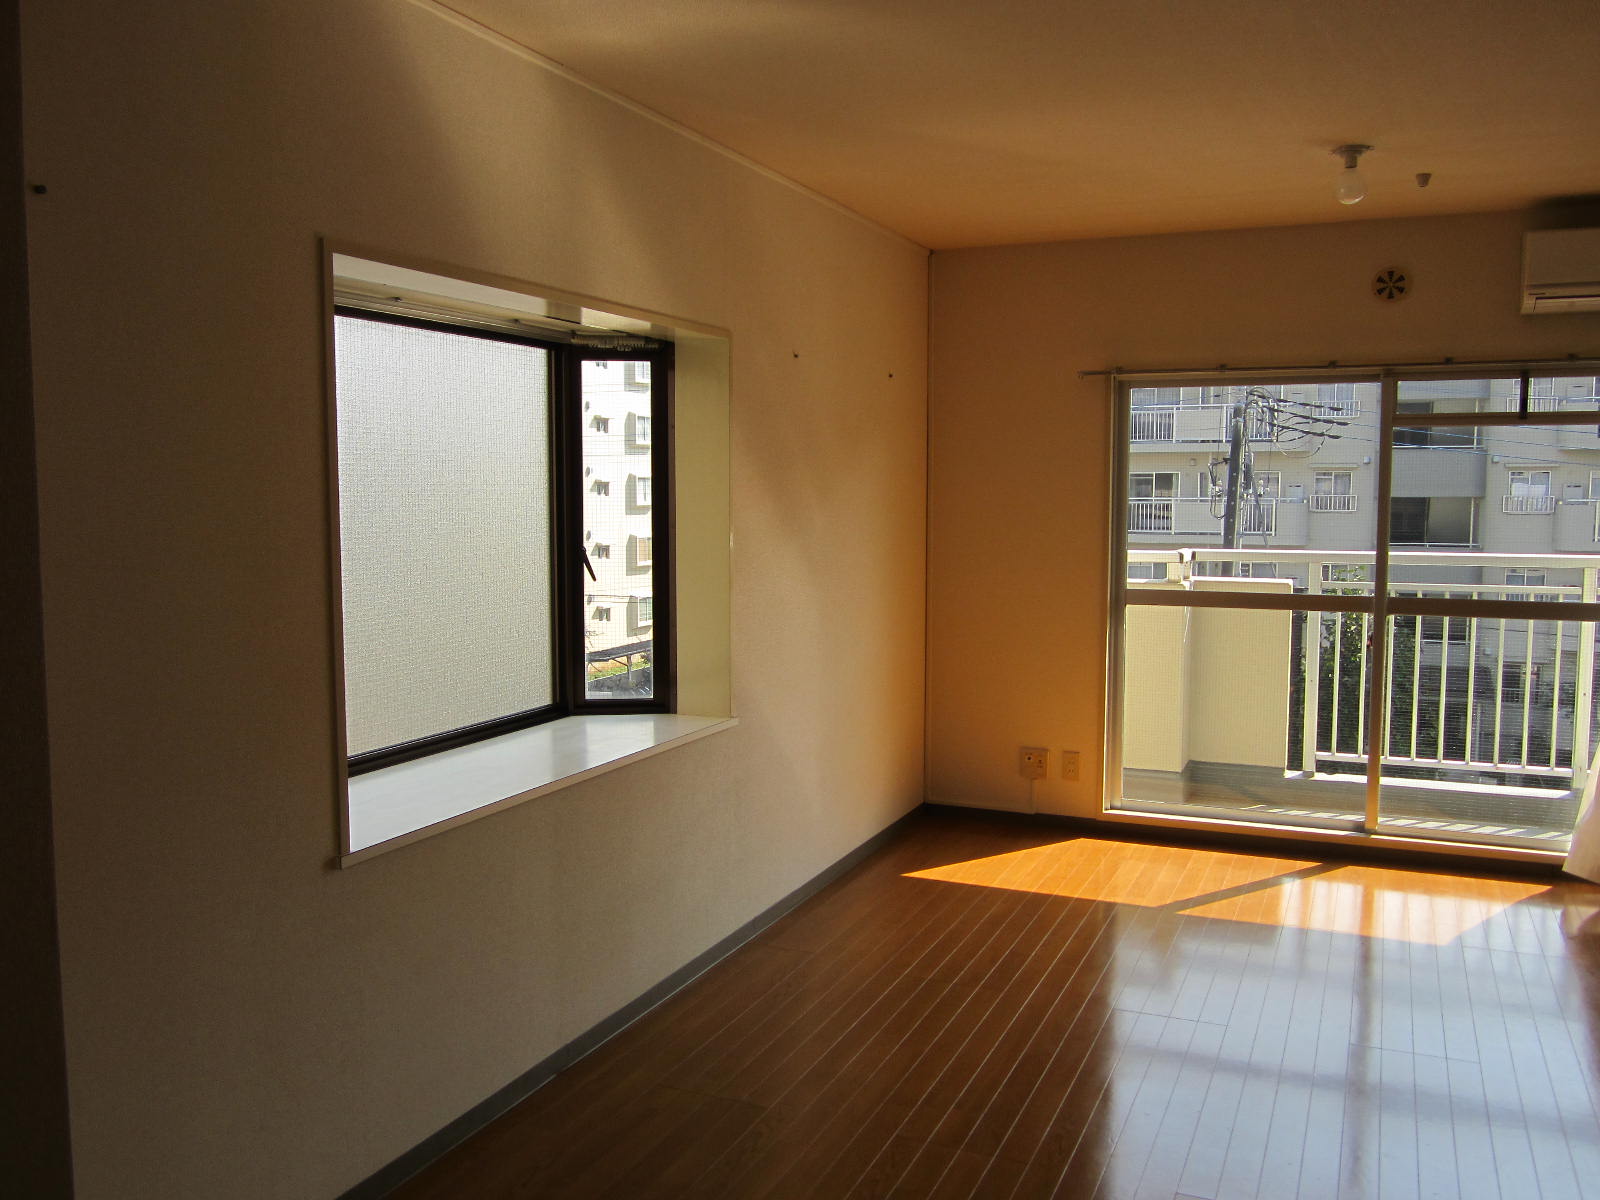 Living and room. There is a bay window bright 9.6 tatami mats of living